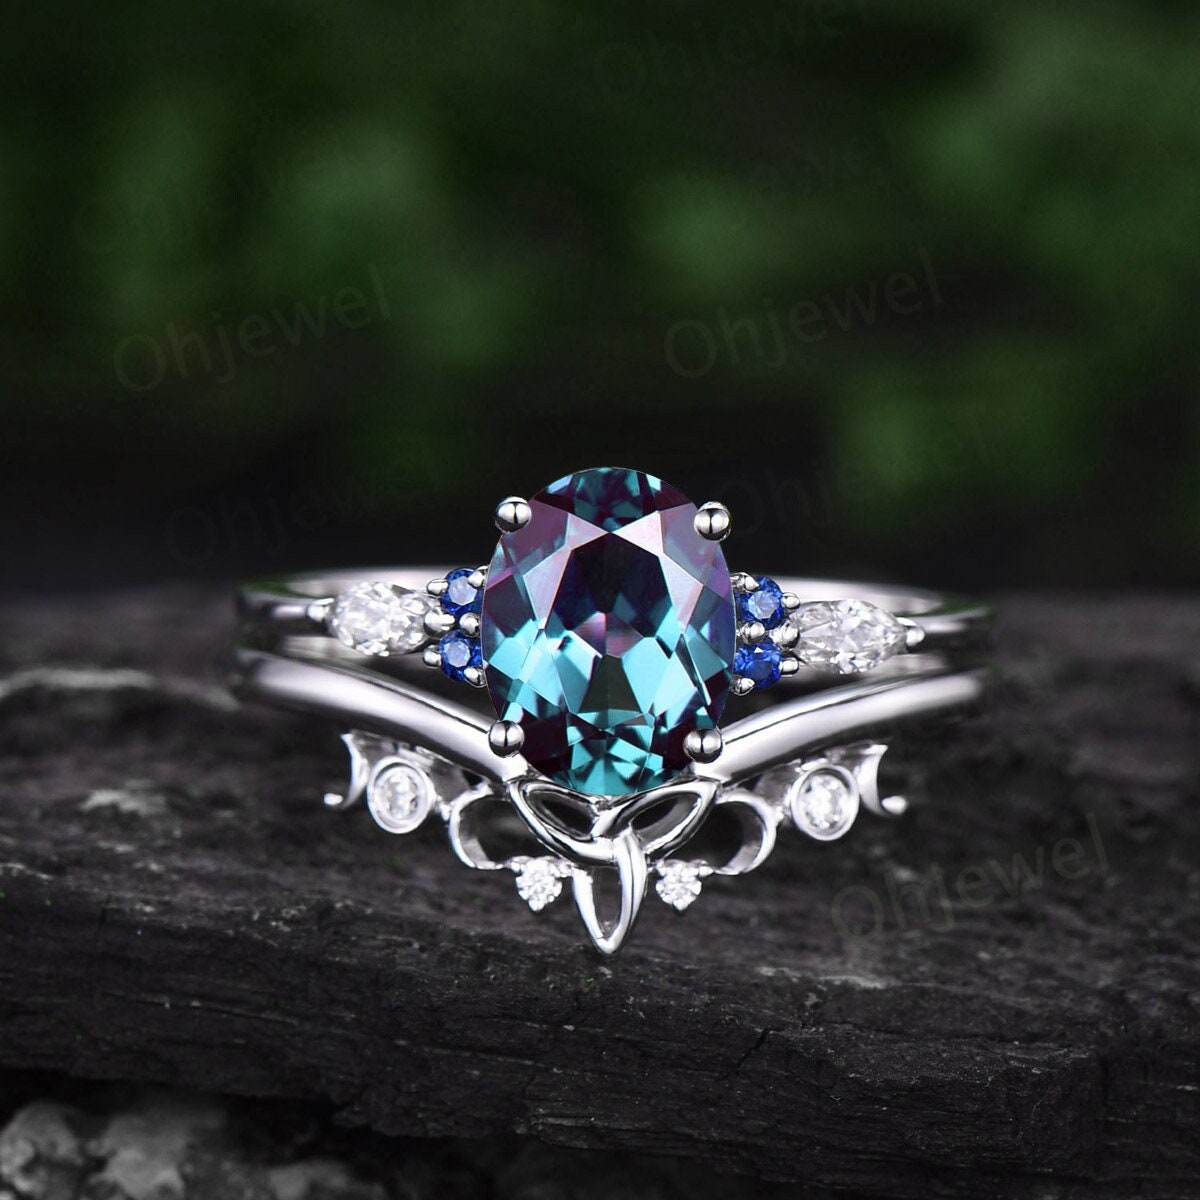 2ct oval cut Alexandrite engagement ring set 14k white gold silver natural sappire ring marquise cut moissanite ring women bridal sets gifts